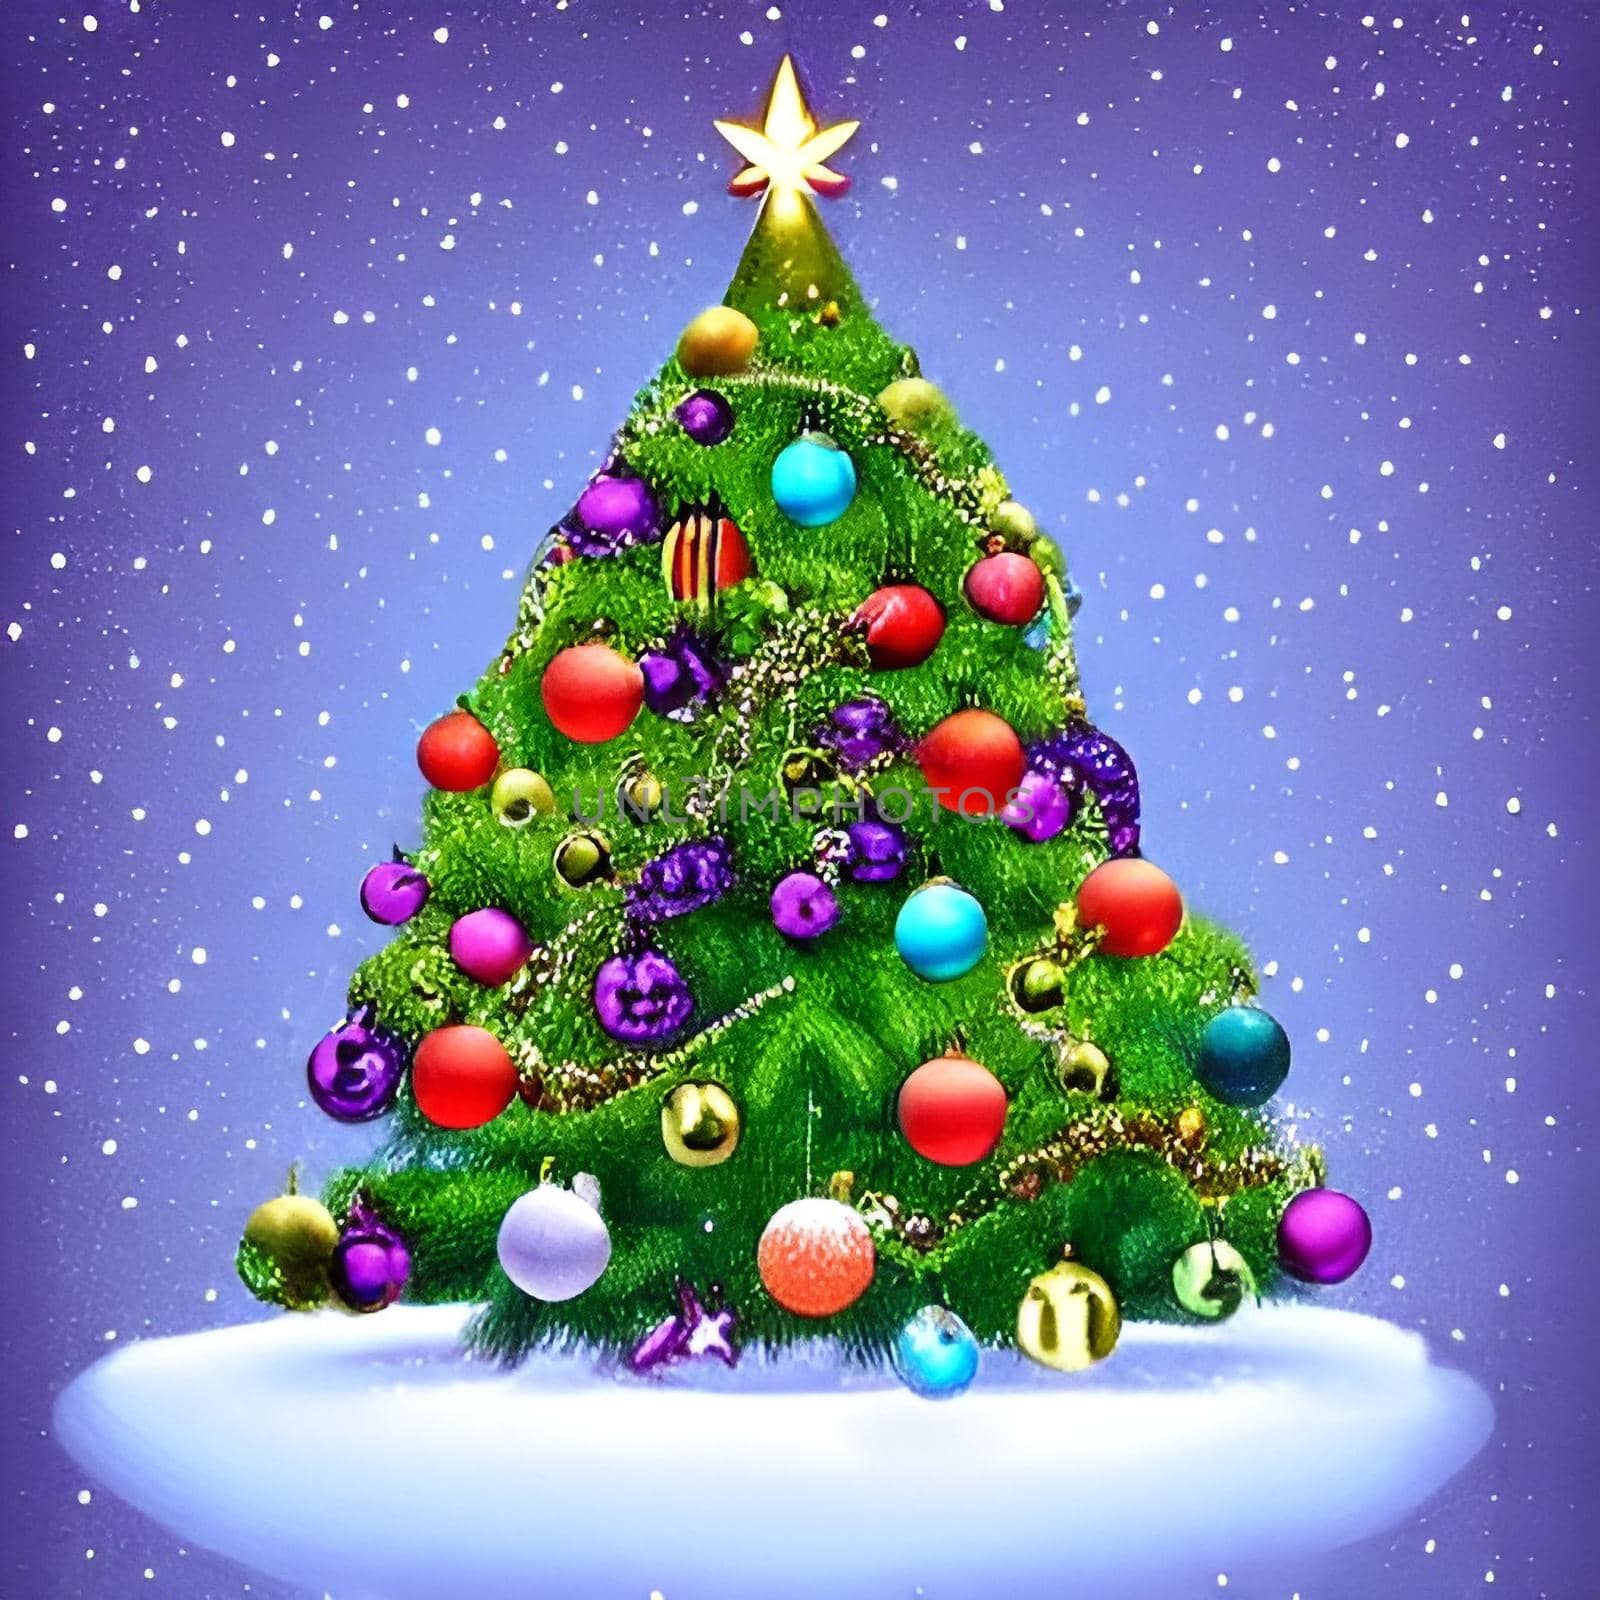 Colorful christmas celebration background with various ornaments fro your christmas greetings card and multimedia content